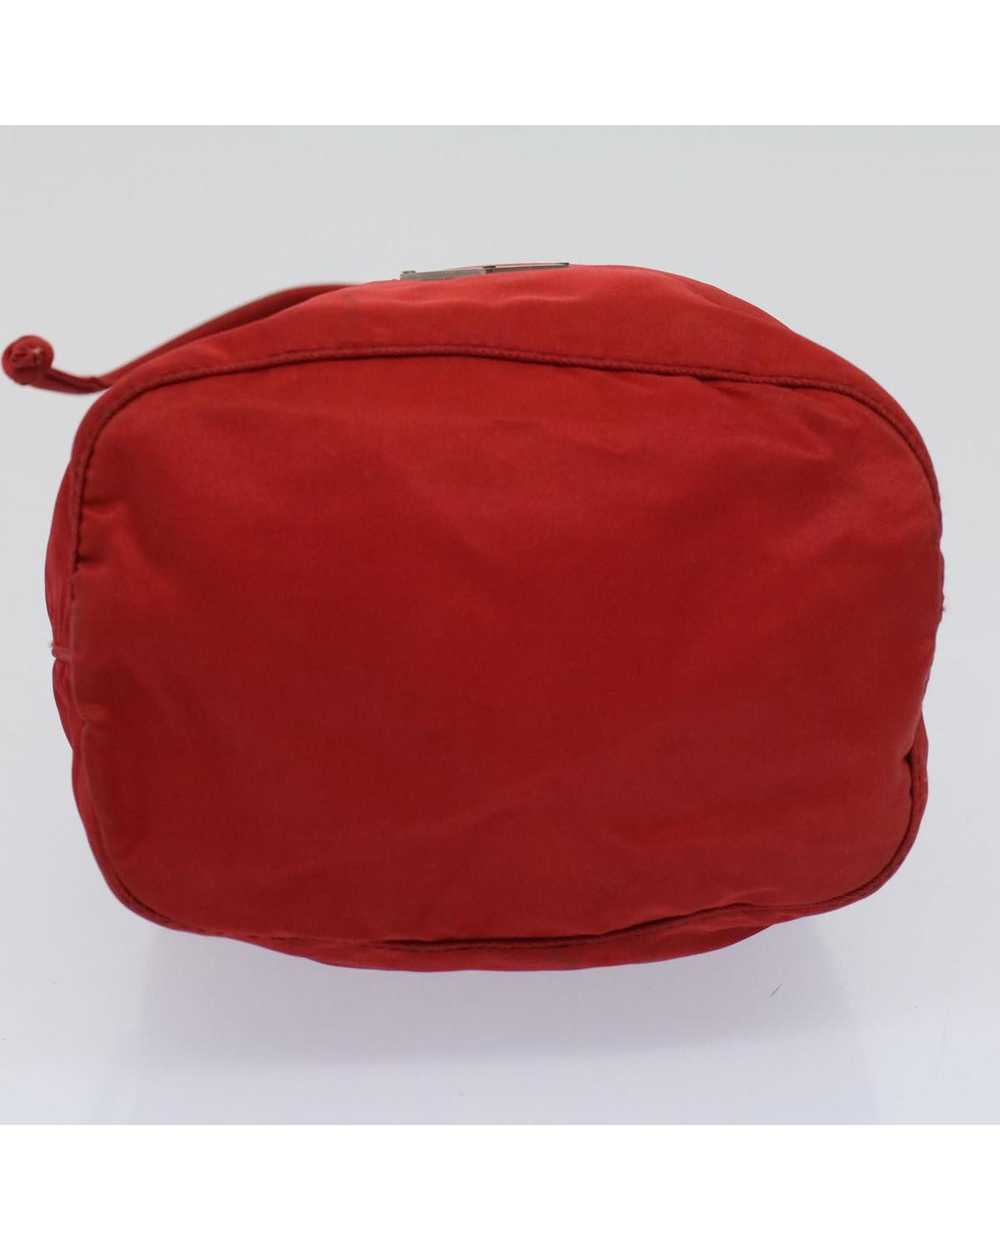 Prada Luxury Red Synthetic Bag - AB Condition - image 7